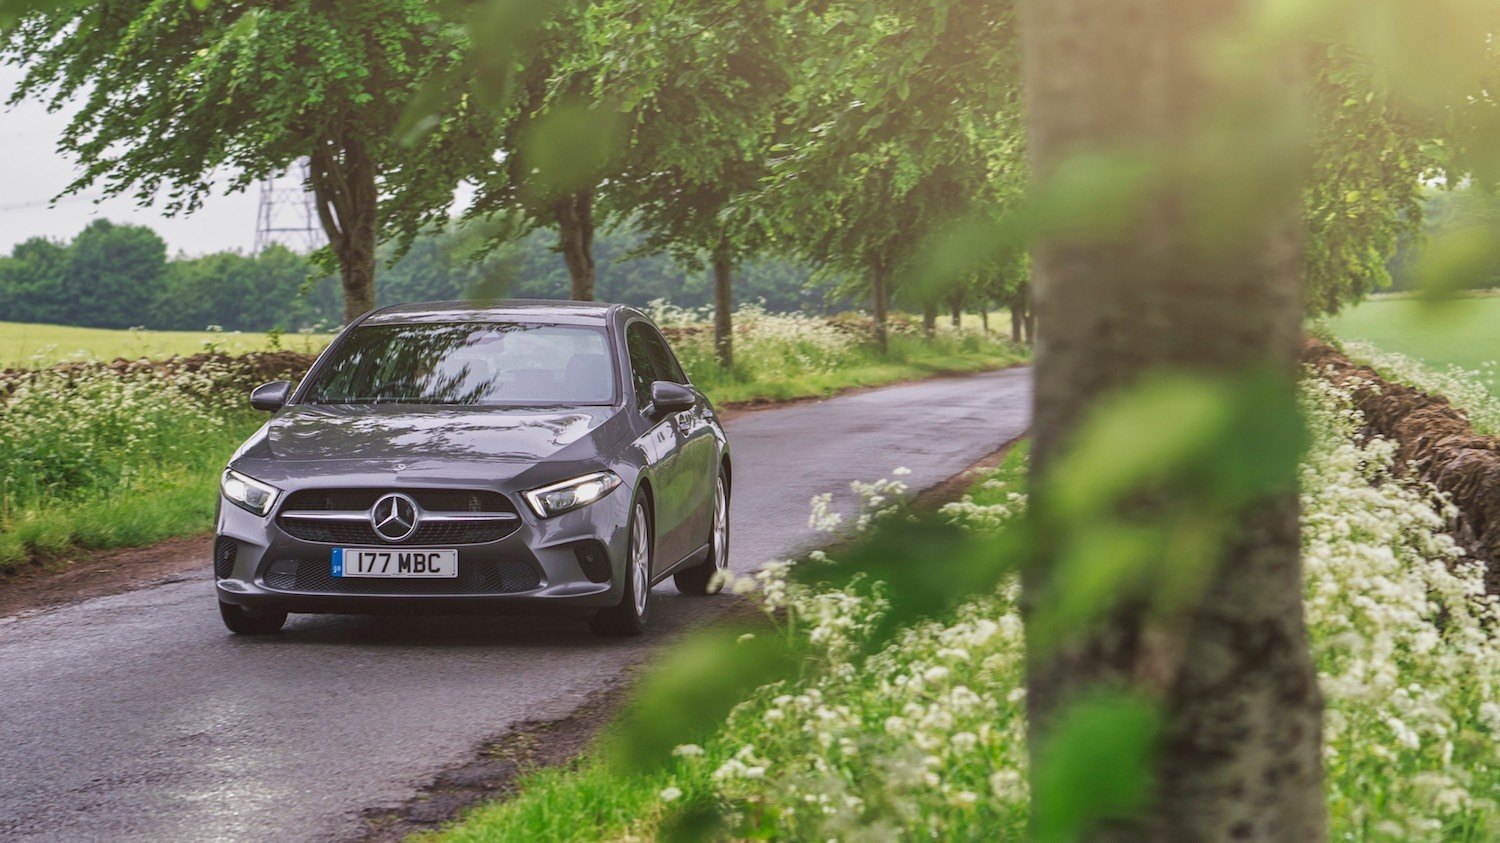 Tim Barnes-Clay reviews the New Mercedes-Benz A-Class 21